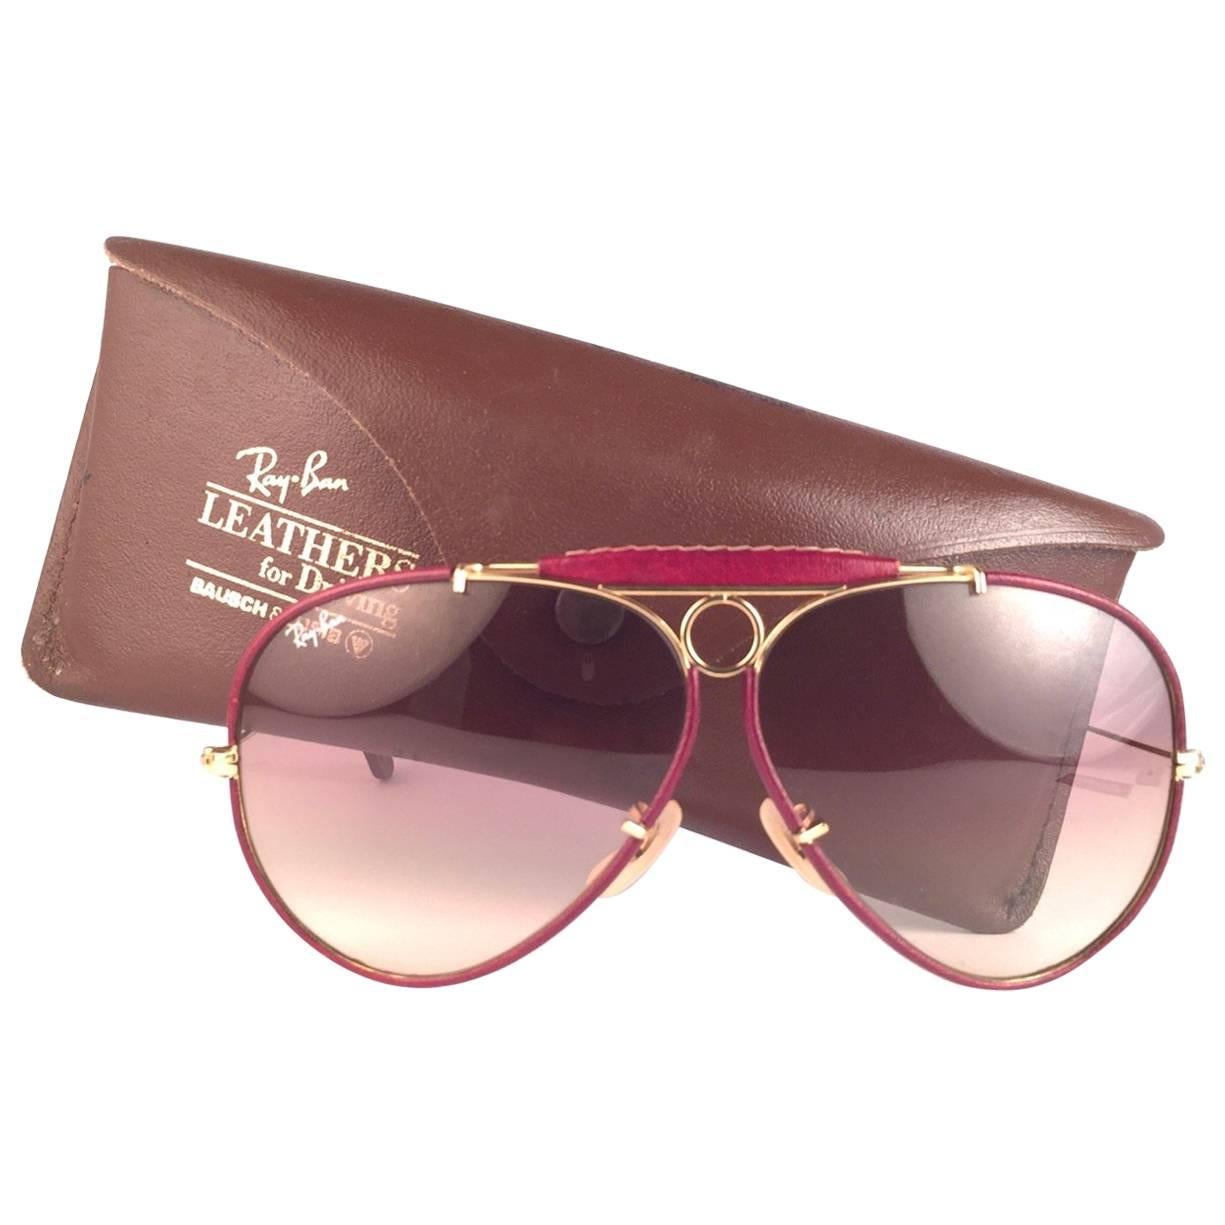 New Vintage Ray Ban Leathers Shooter Burgundy 62Mm B&L Sunglasses